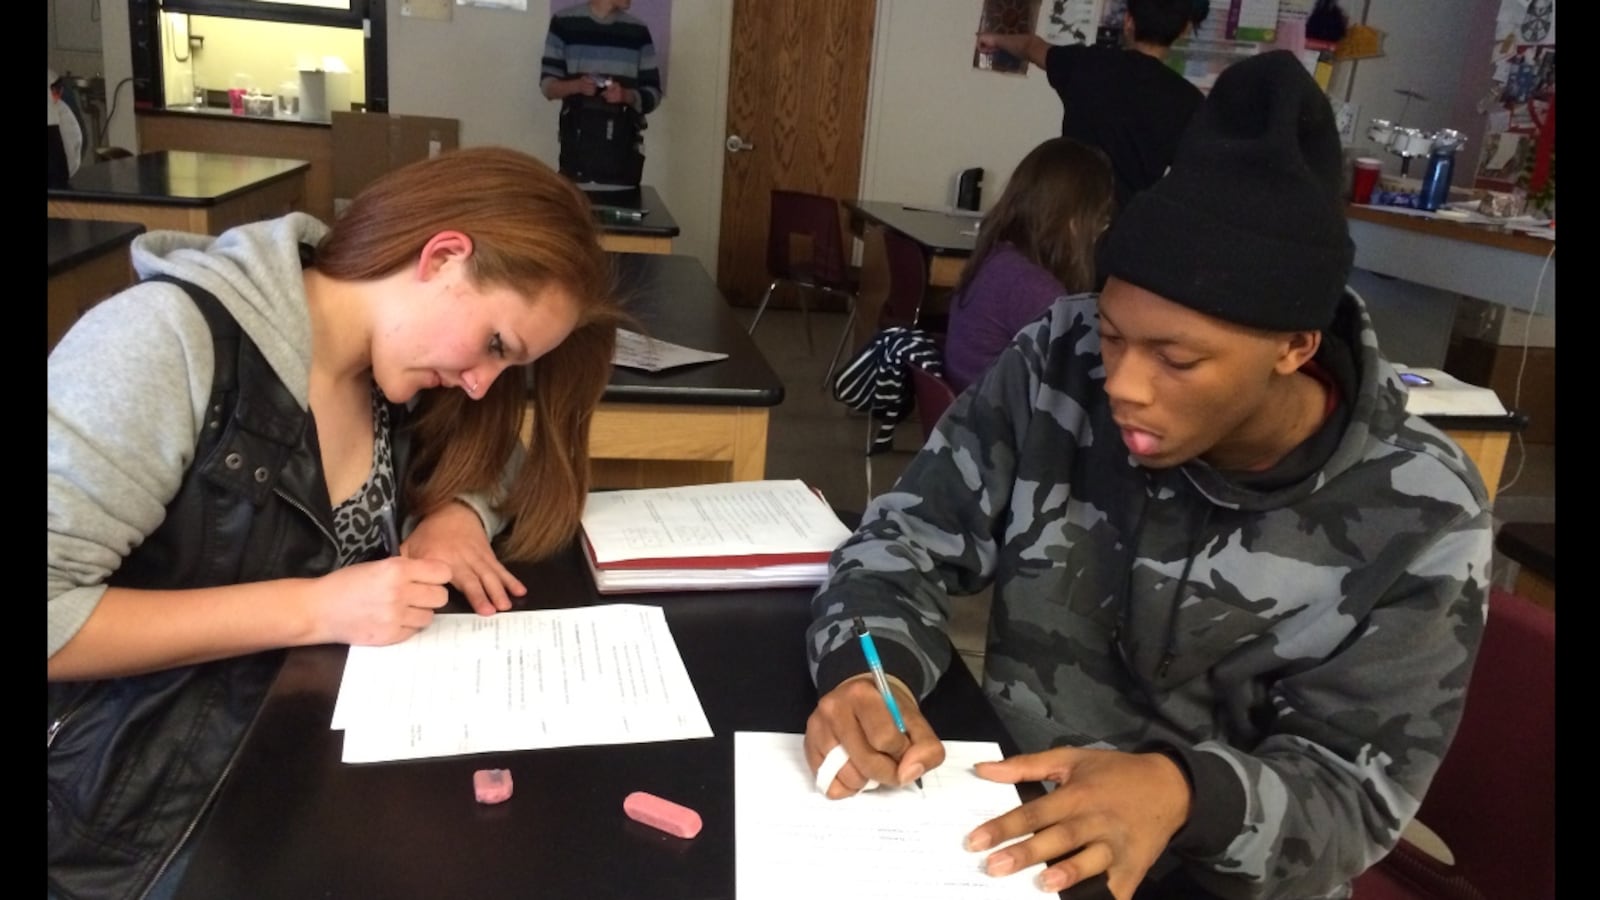 Students in a "detracked" East High honors biology class work together prepping for a quiz